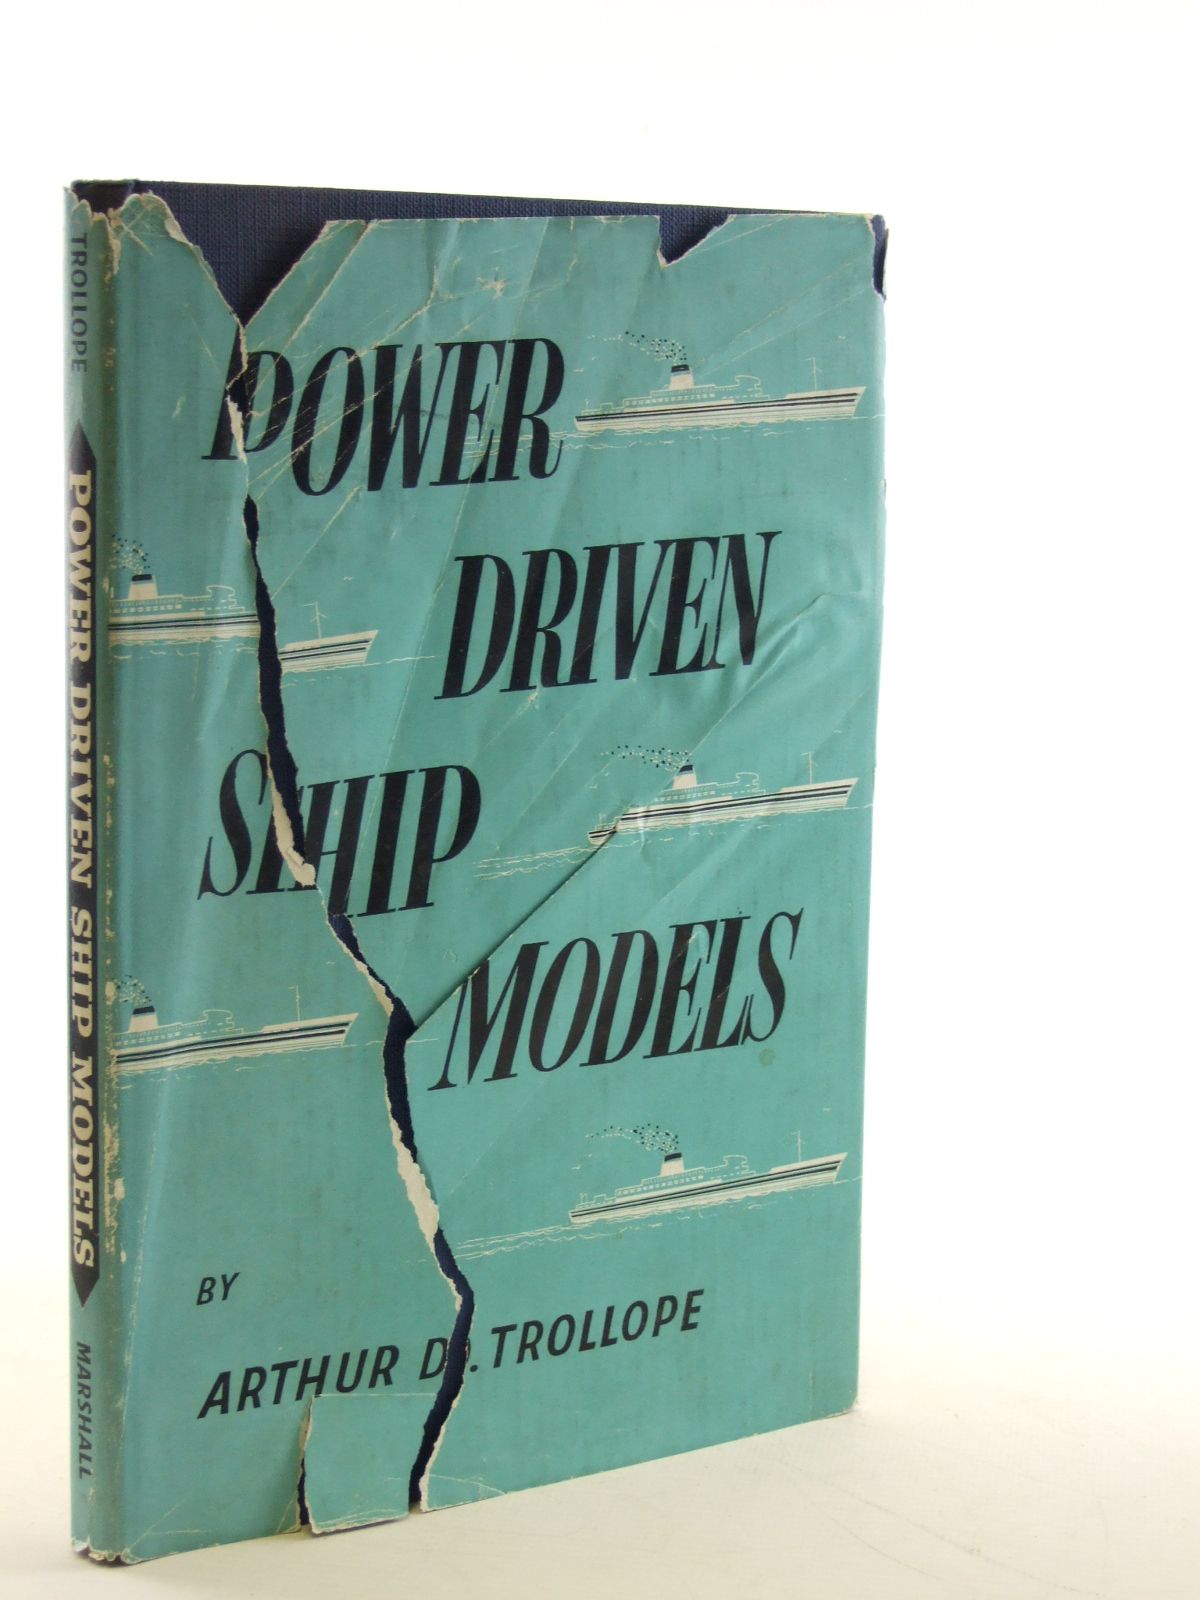 Photo of POWER DRIVEN SHIP MODELS written by Trollope, A.D. published by Percival Marshall And Co Ltd. (STOCK CODE: 1603375)  for sale by Stella & Rose's Books